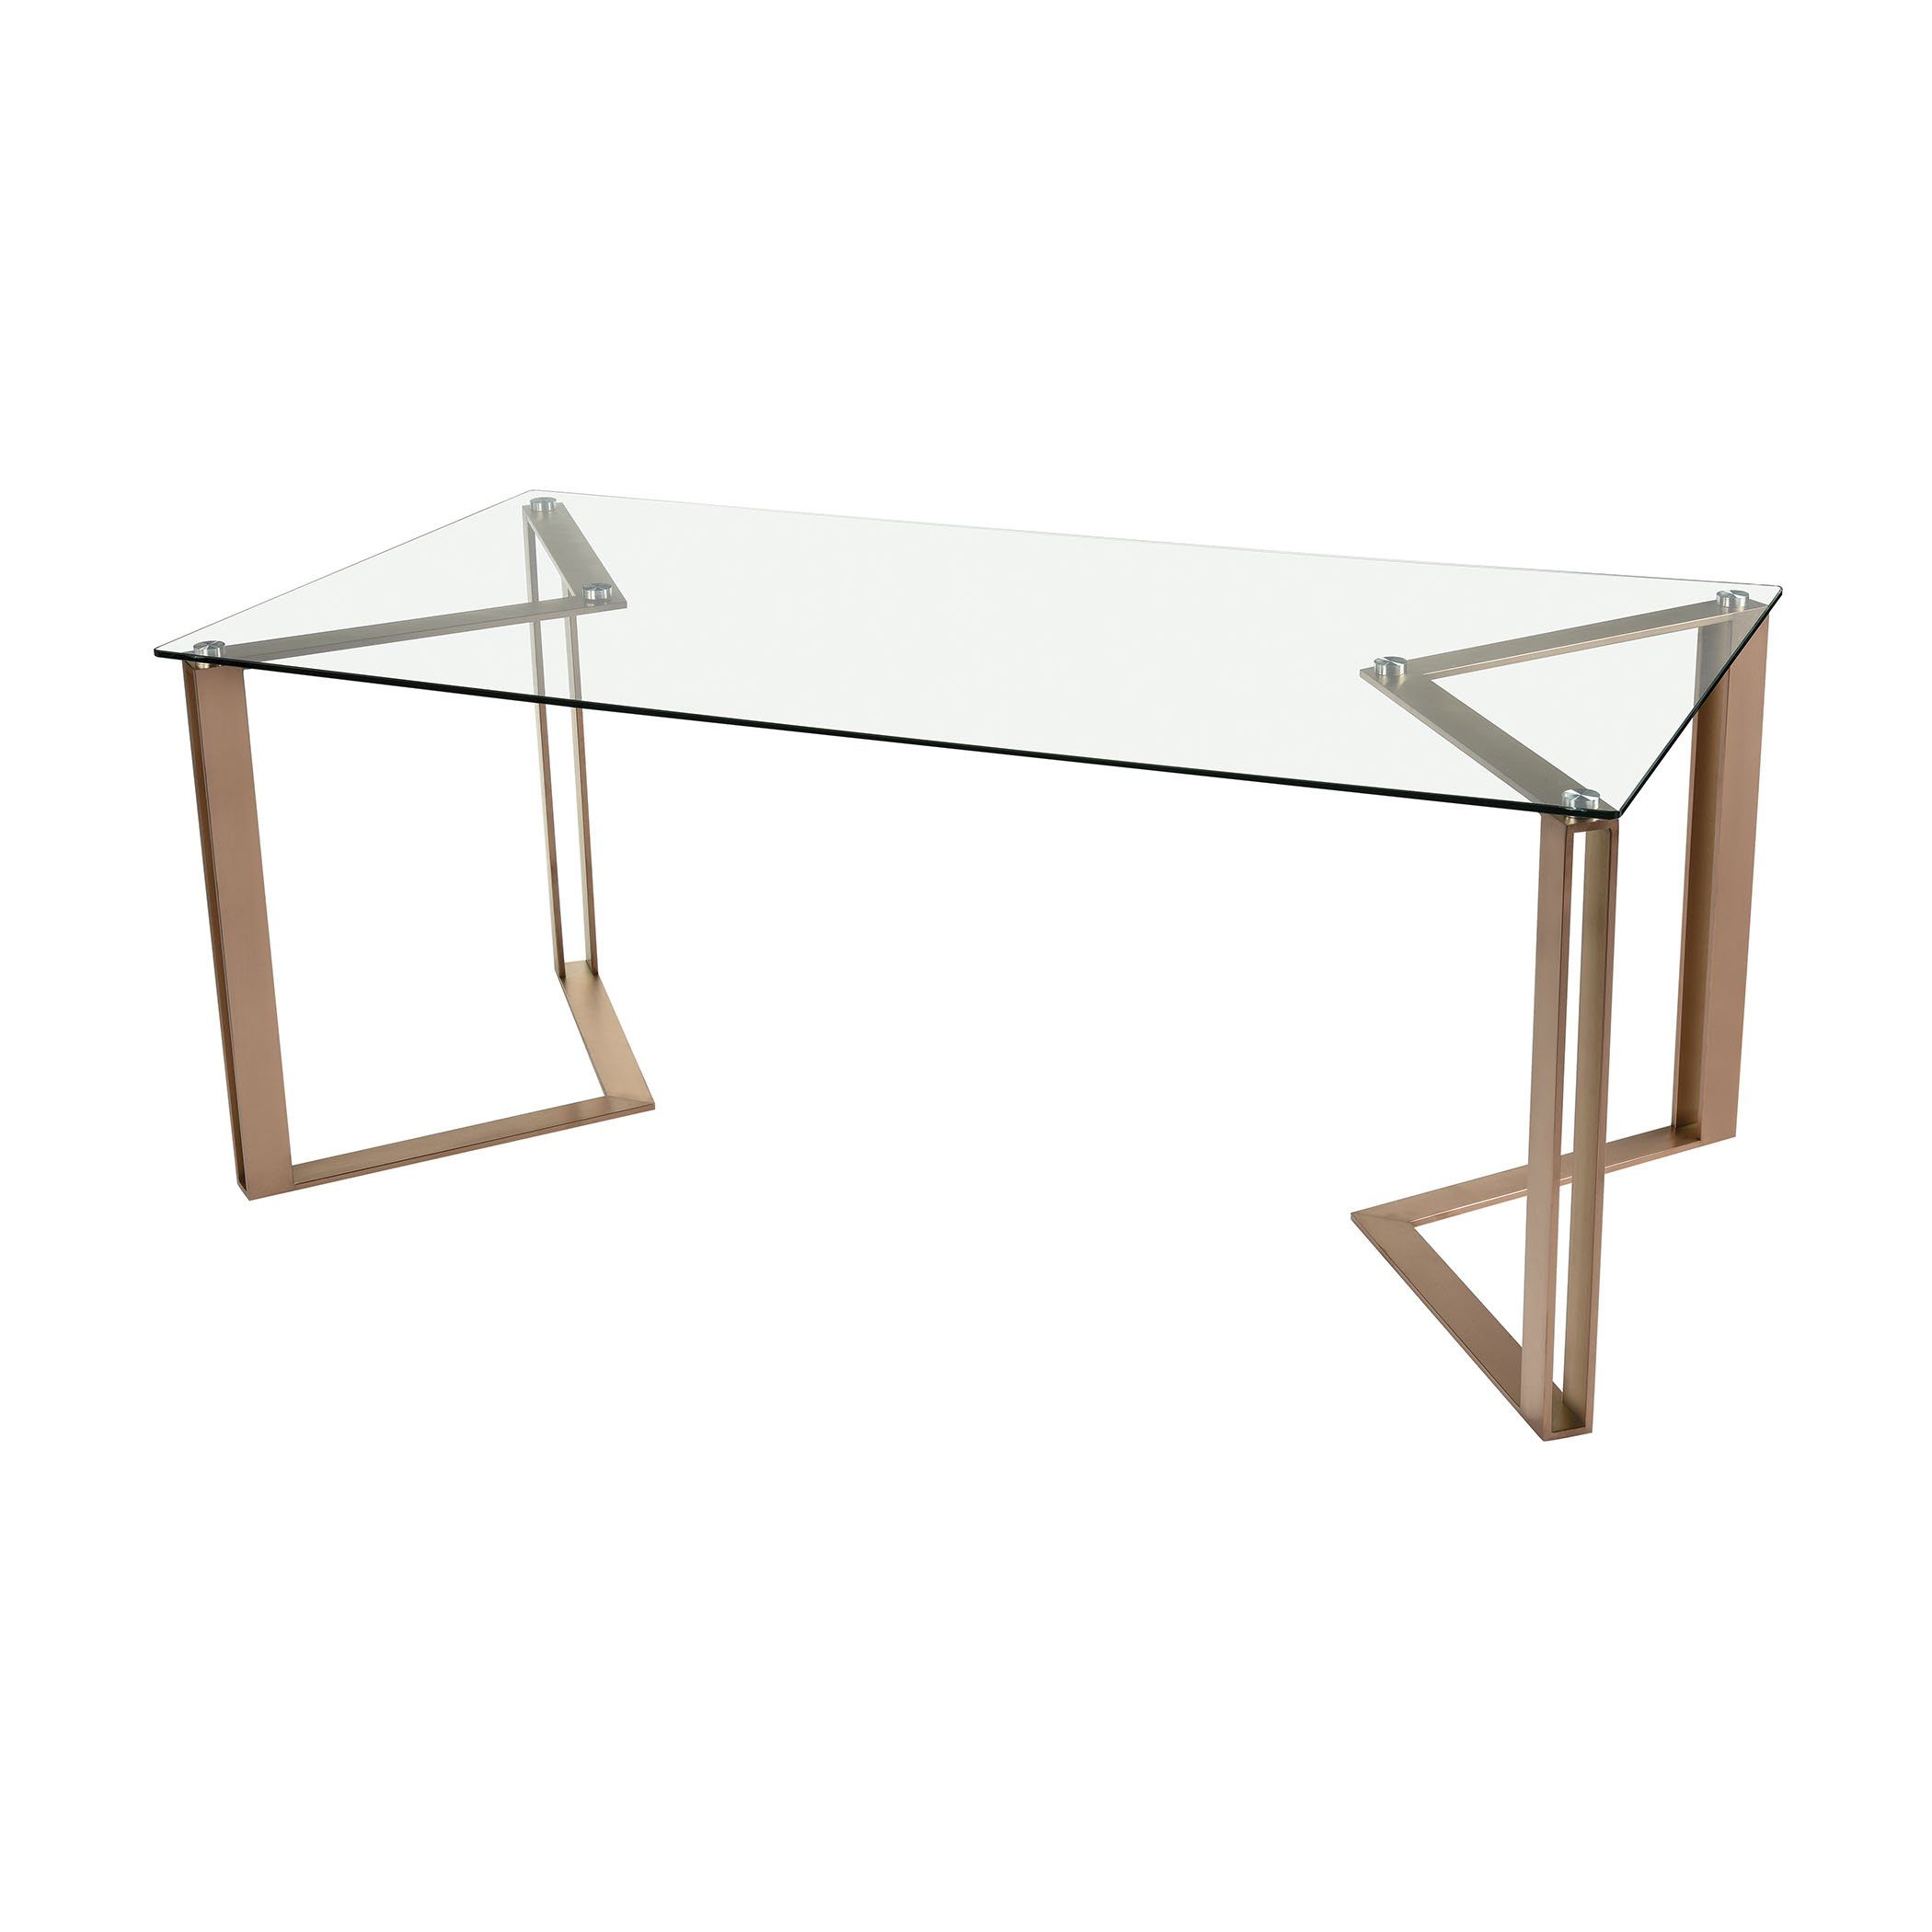 Acuity Dining Table Furniture Dimond Home 